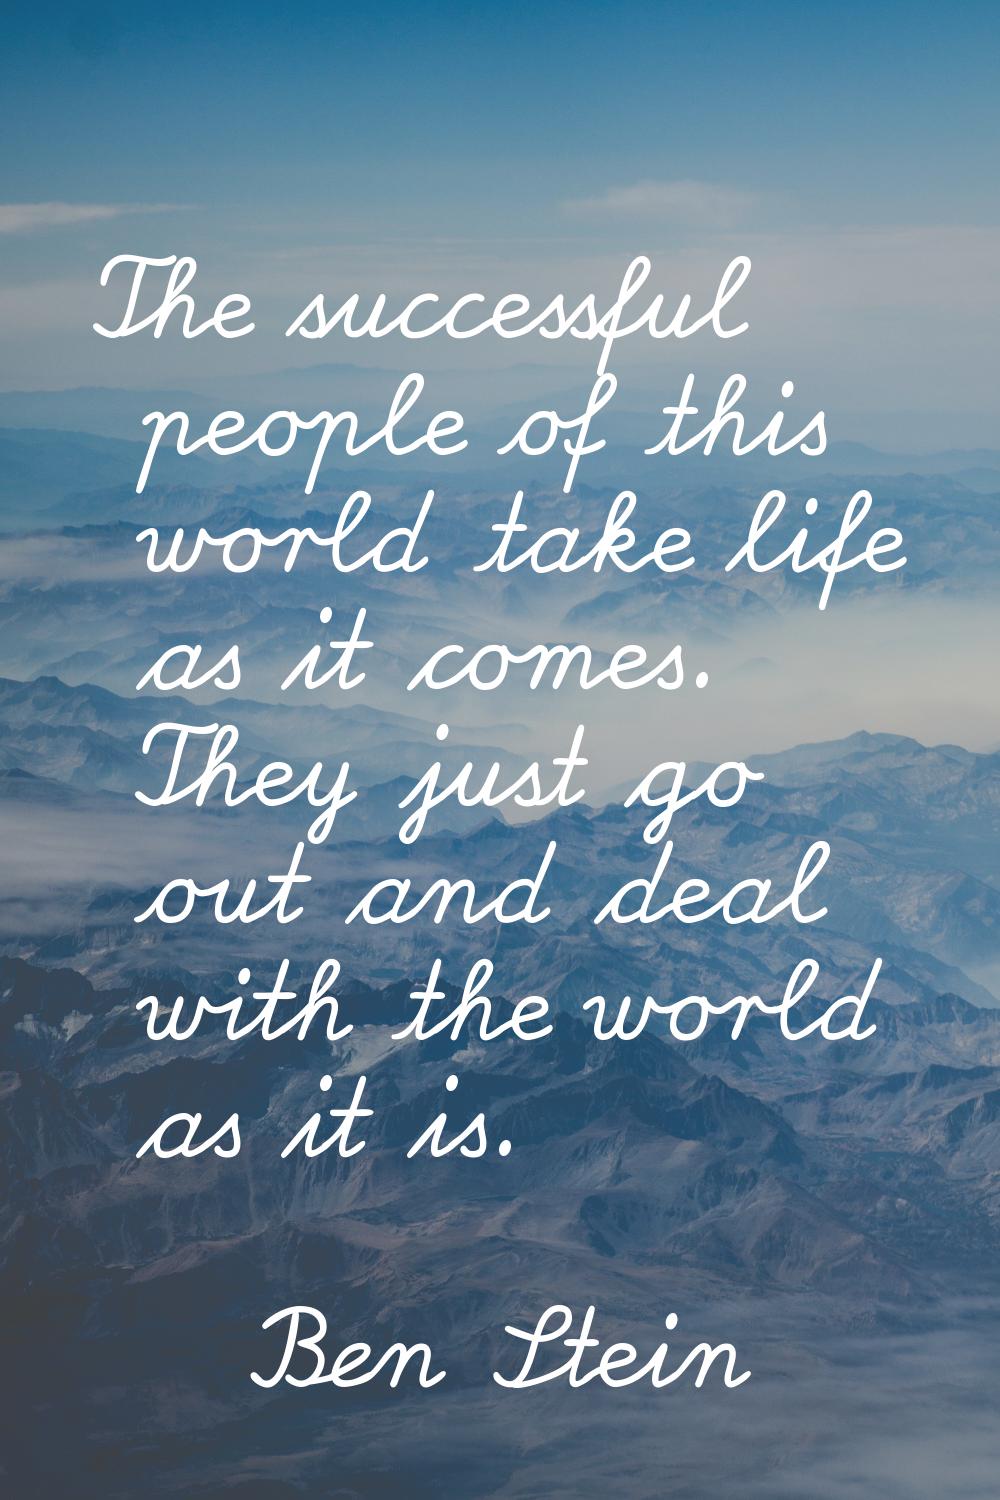 The successful people of this world take life as it comes. They just go out and deal with the world